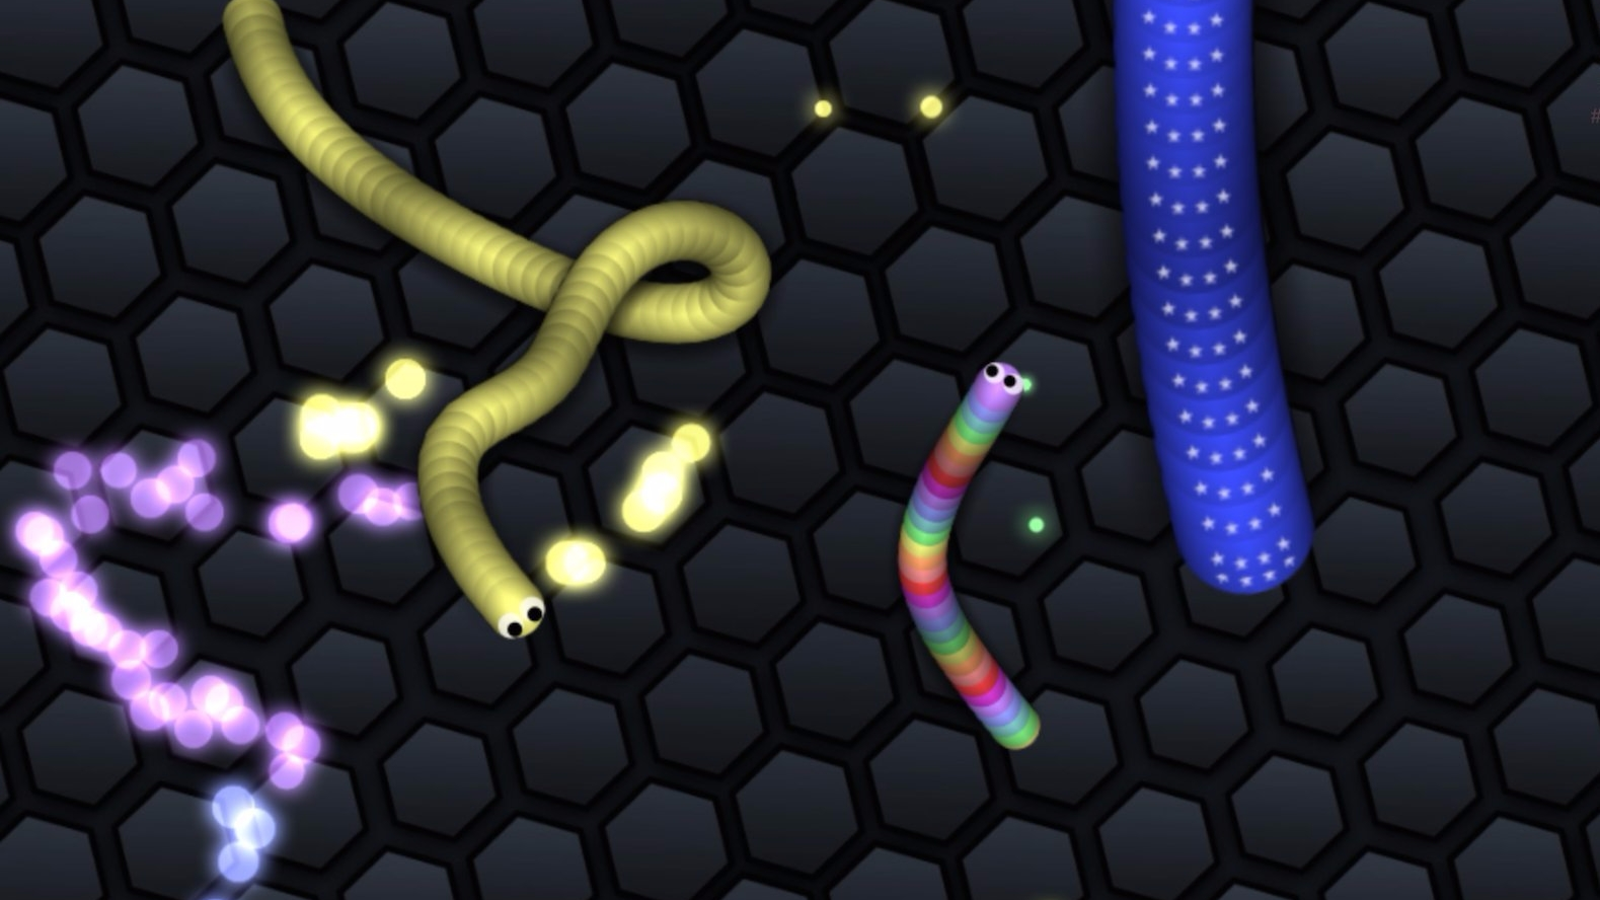 Snake's alive! The expanding cult of Slither.io